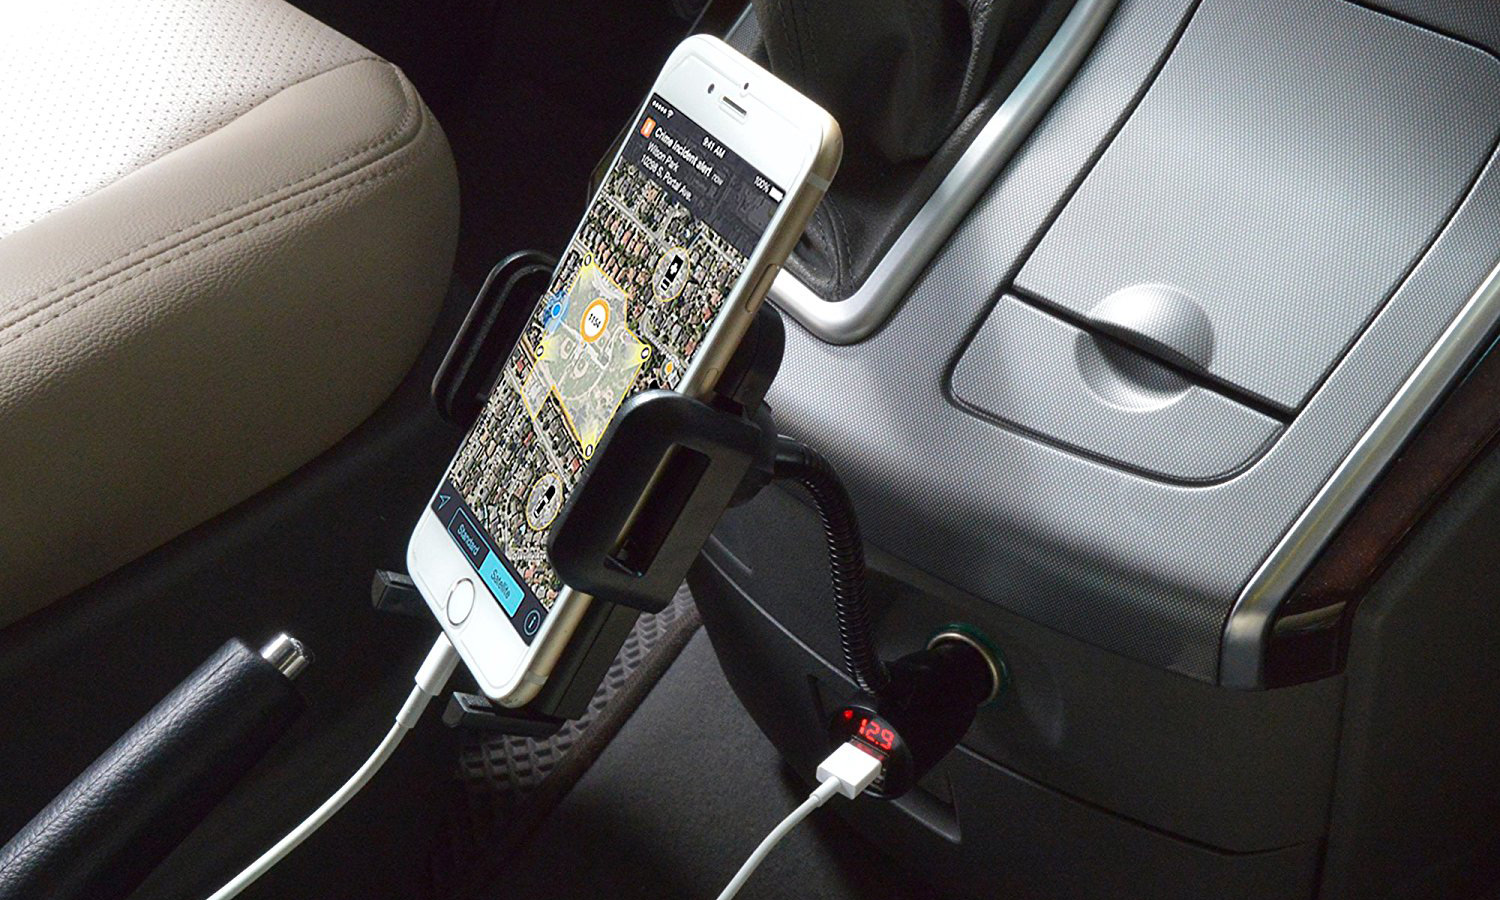 How to Choose the Best Cell Phone Holder for Your Car - Best Buy